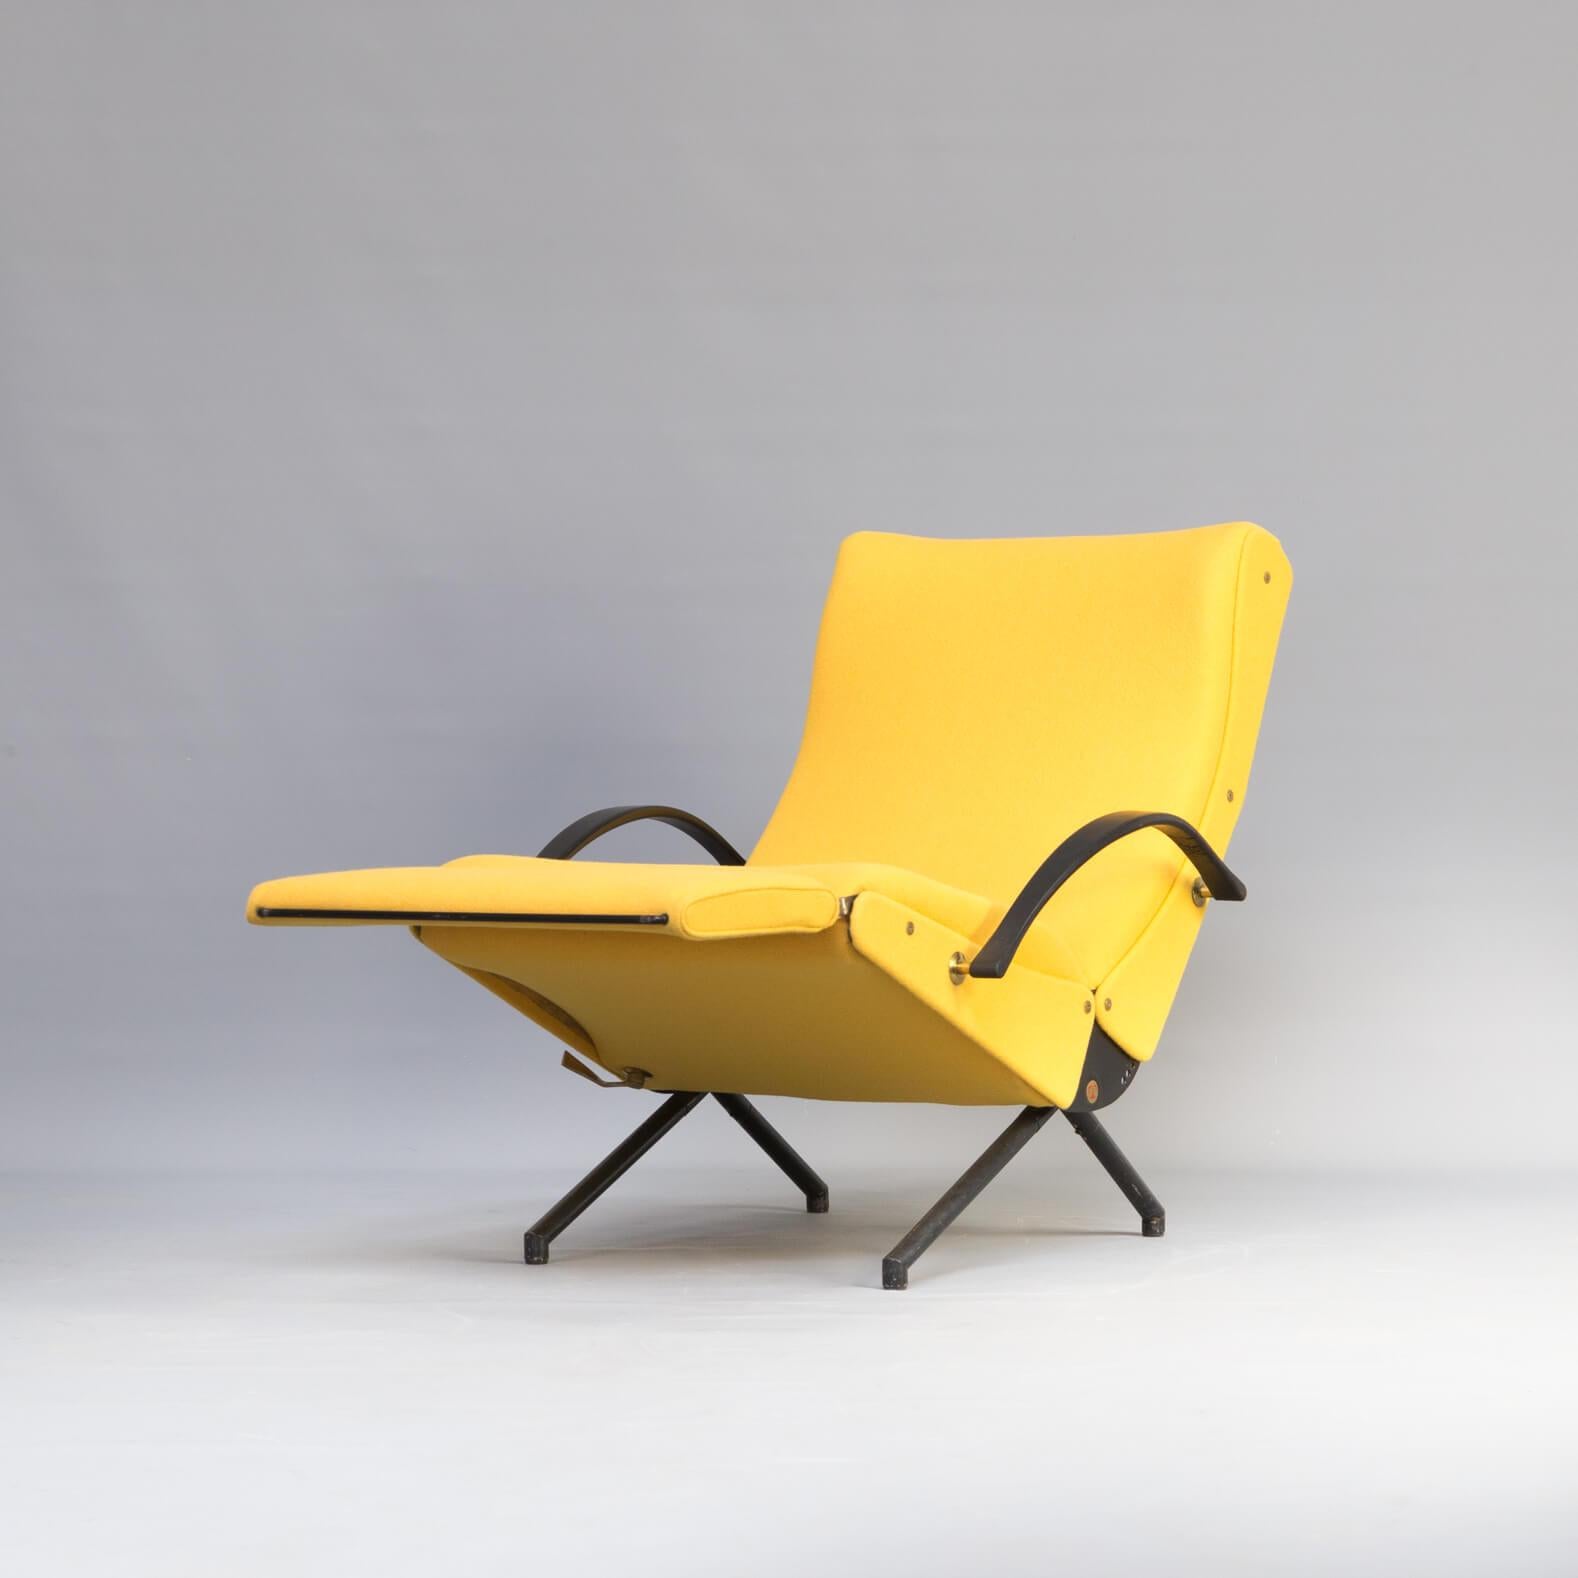 First edition P40 lounge chair by Osvaldo Borsani for Tecno. The first edition model has a round tubular base. The P40 lounge chair can be adjusted into different positions. The seat, back-and footrest can all be adjusted separate from each other.